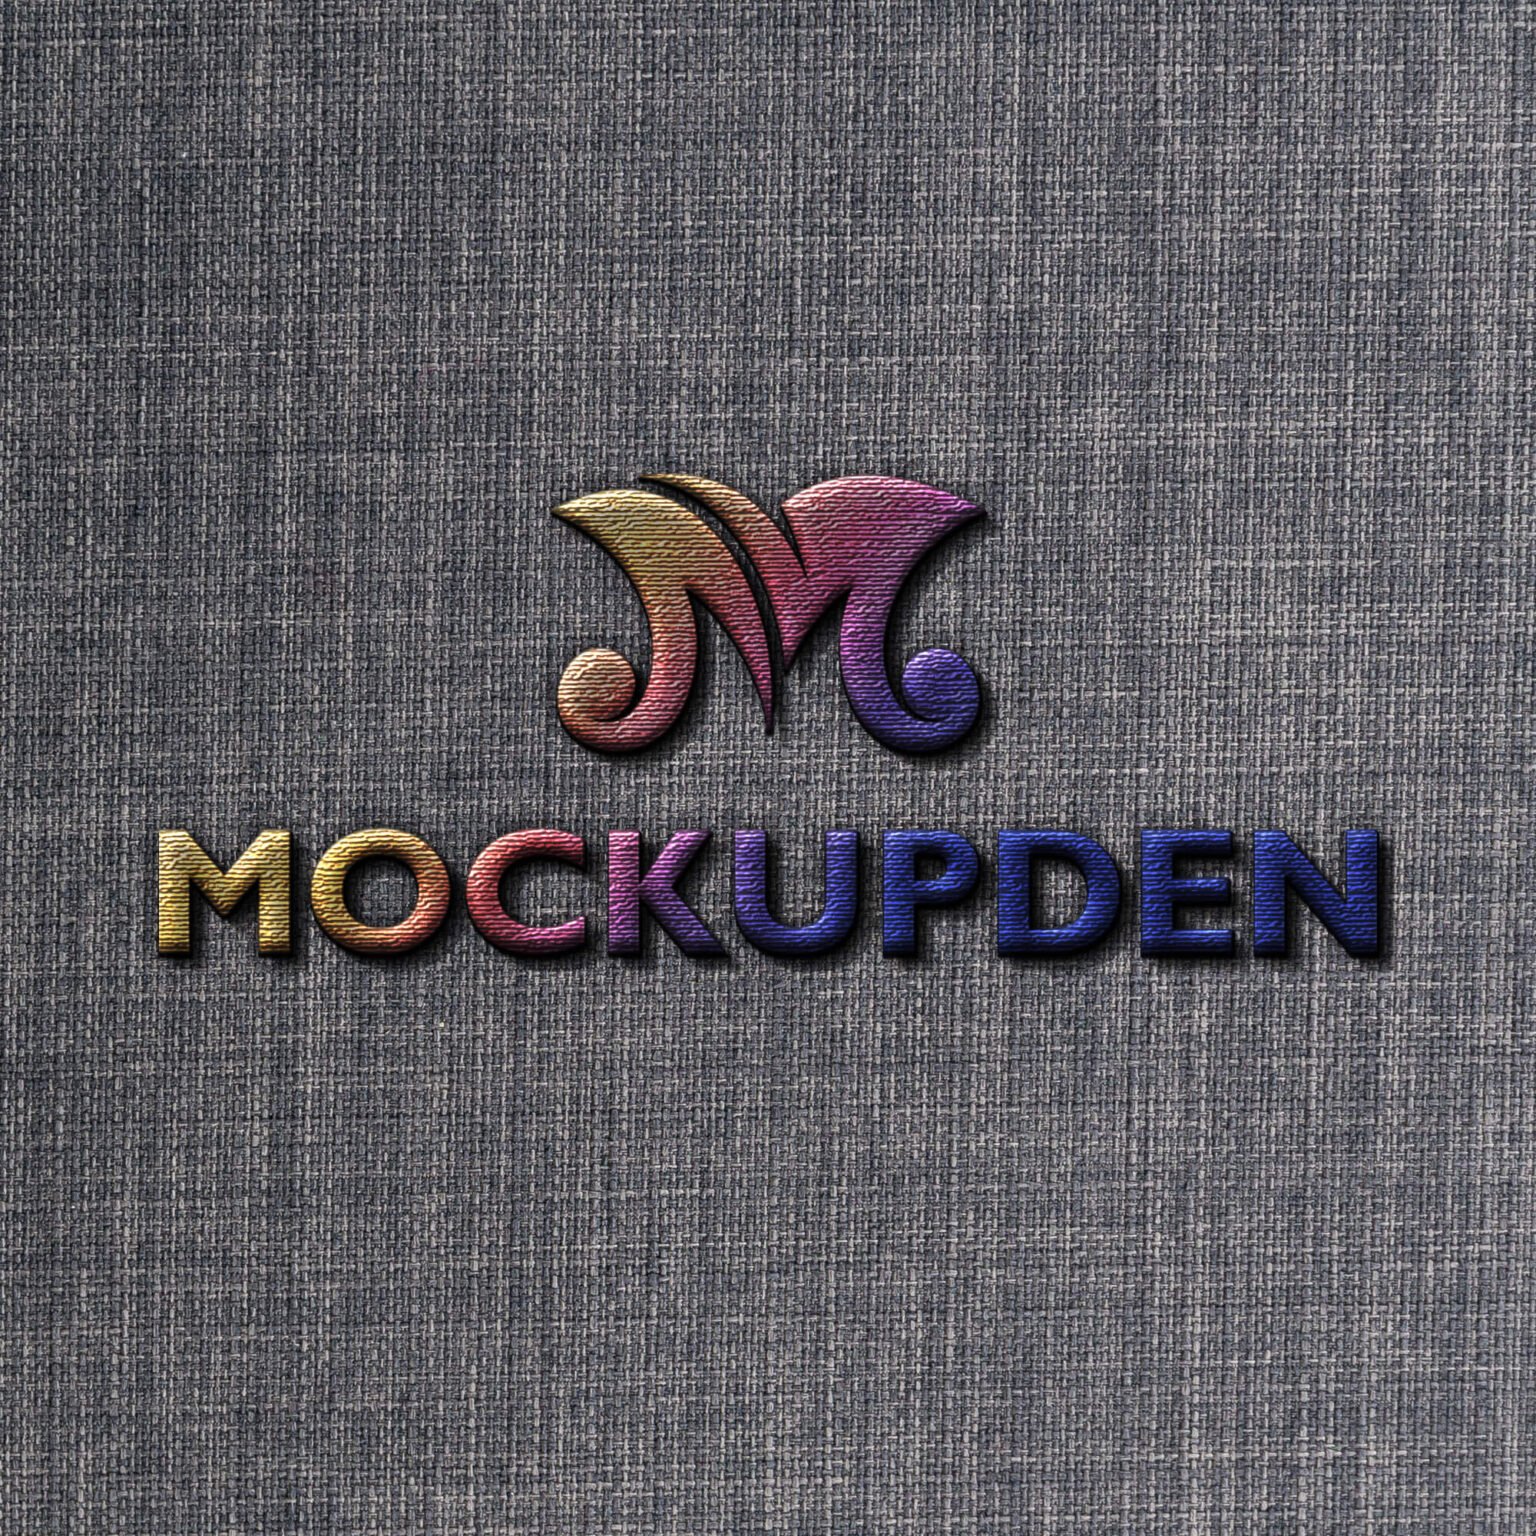 Download Free Embroidery Stitch Mockup PSD Template - Mockup Den